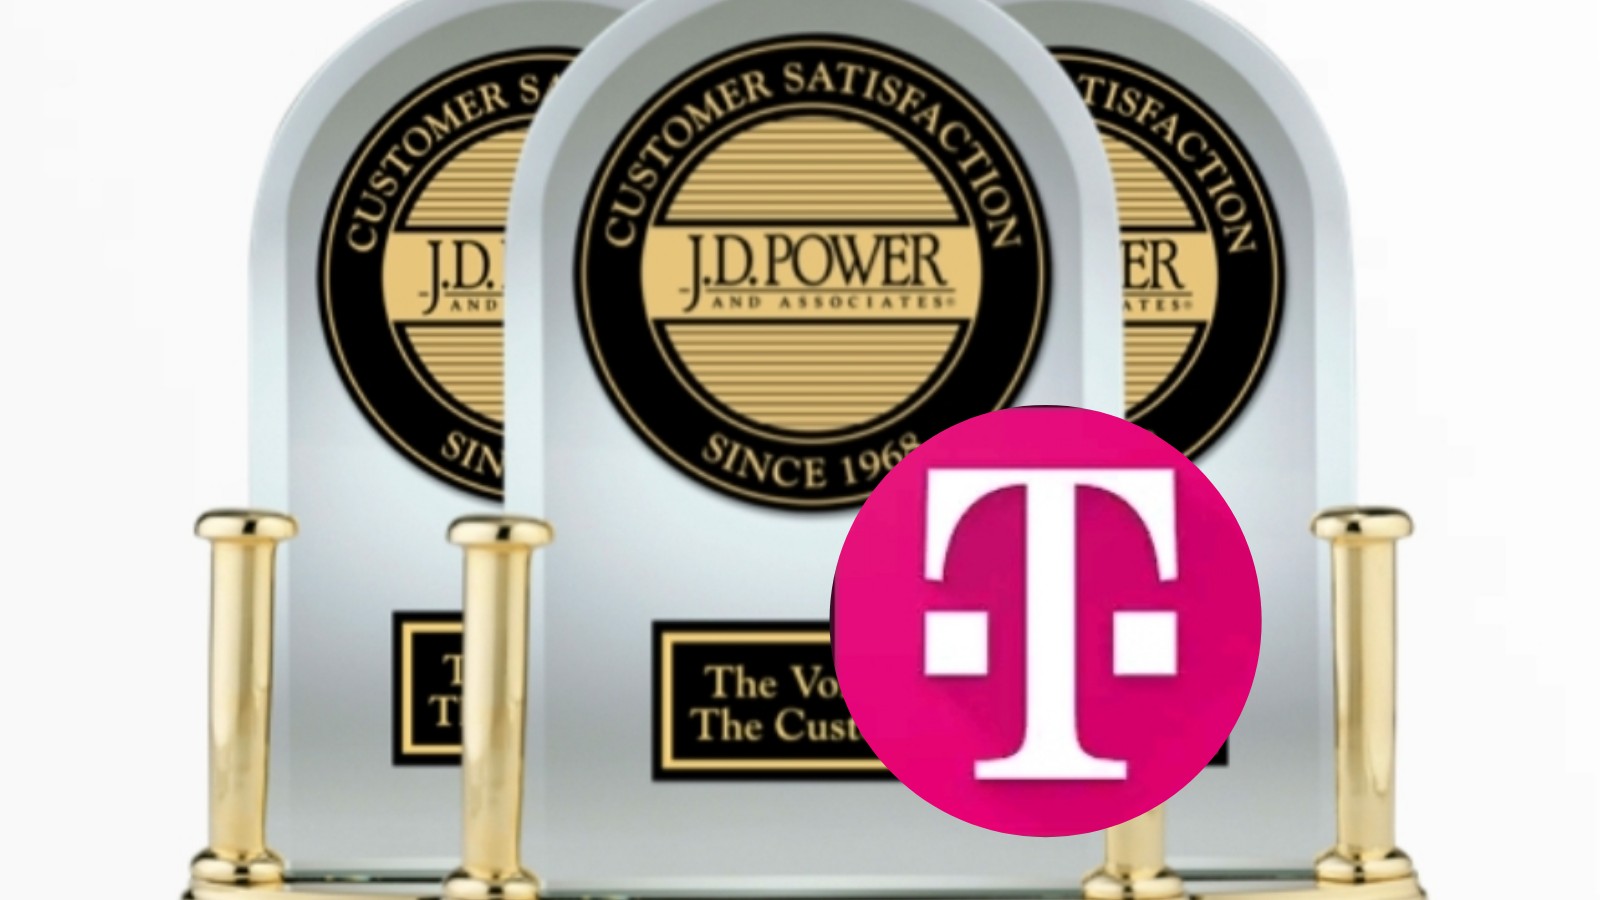 T-Mobile wins big with J.D. Power